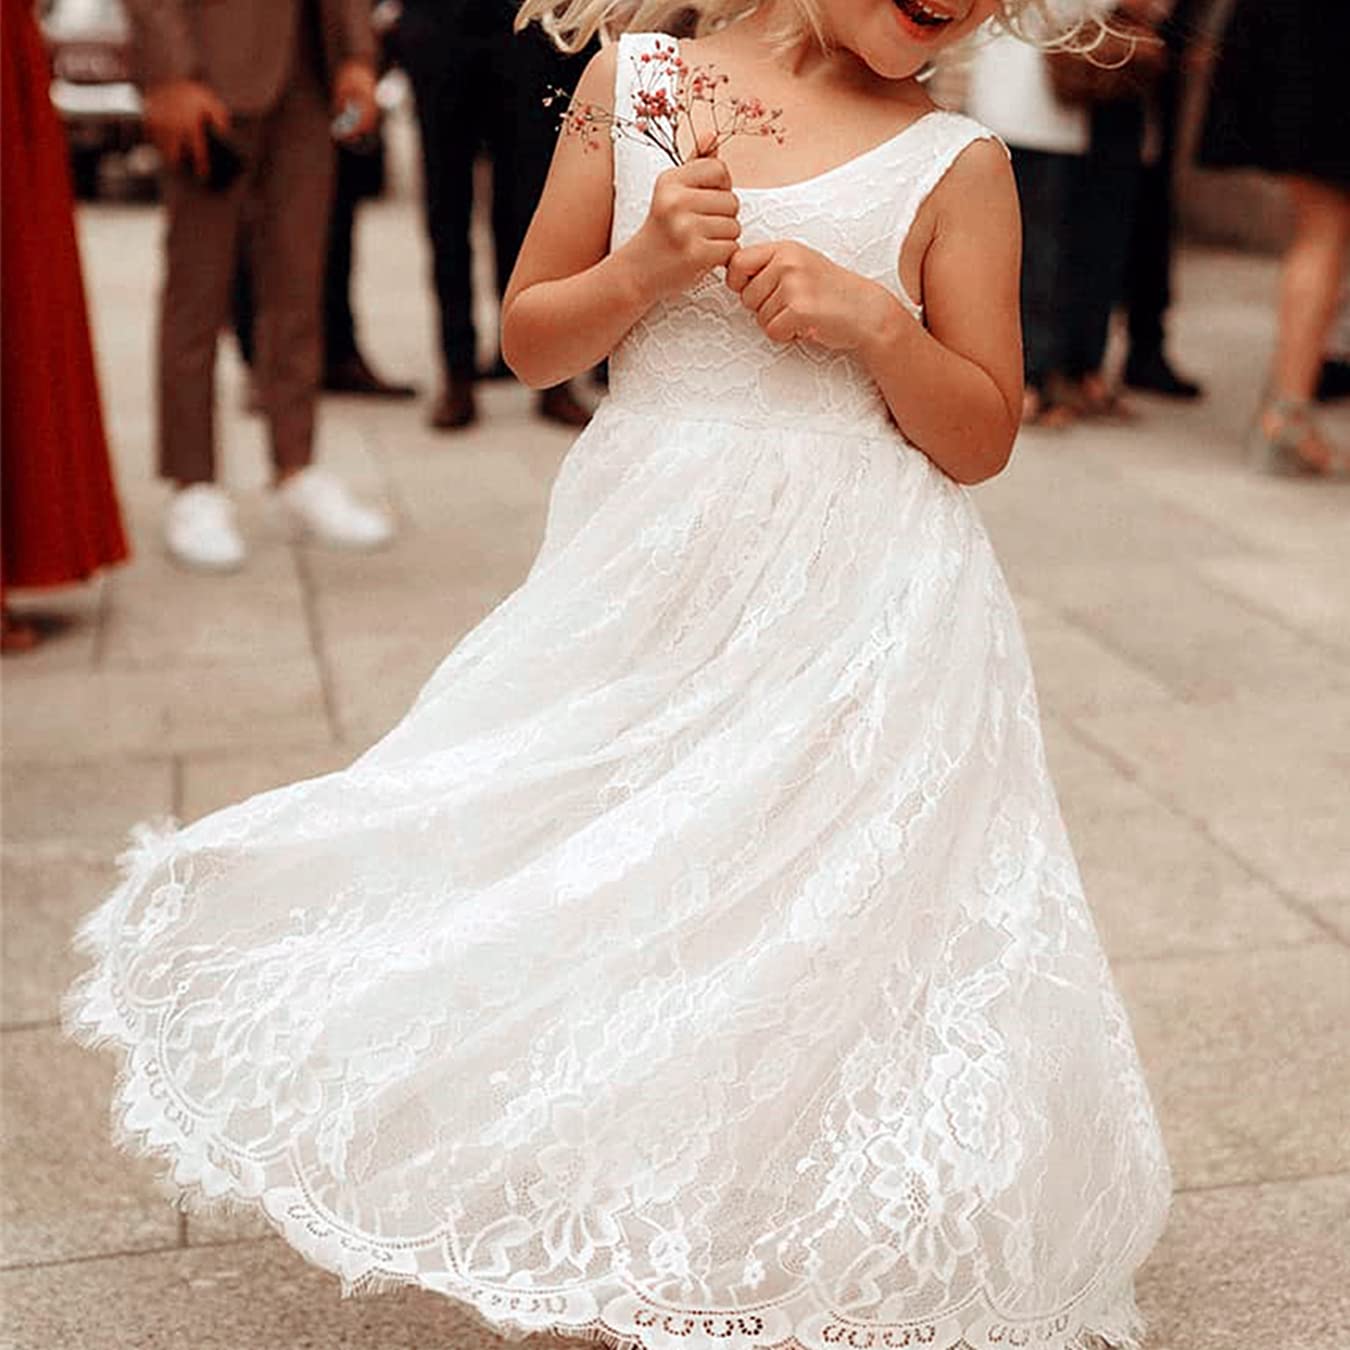 2Bunnies Flower Girl Dress Rose Lace Back A-Line Sleeveless Straight Tulle Maxi (All Lace White) - 2BUNNIES